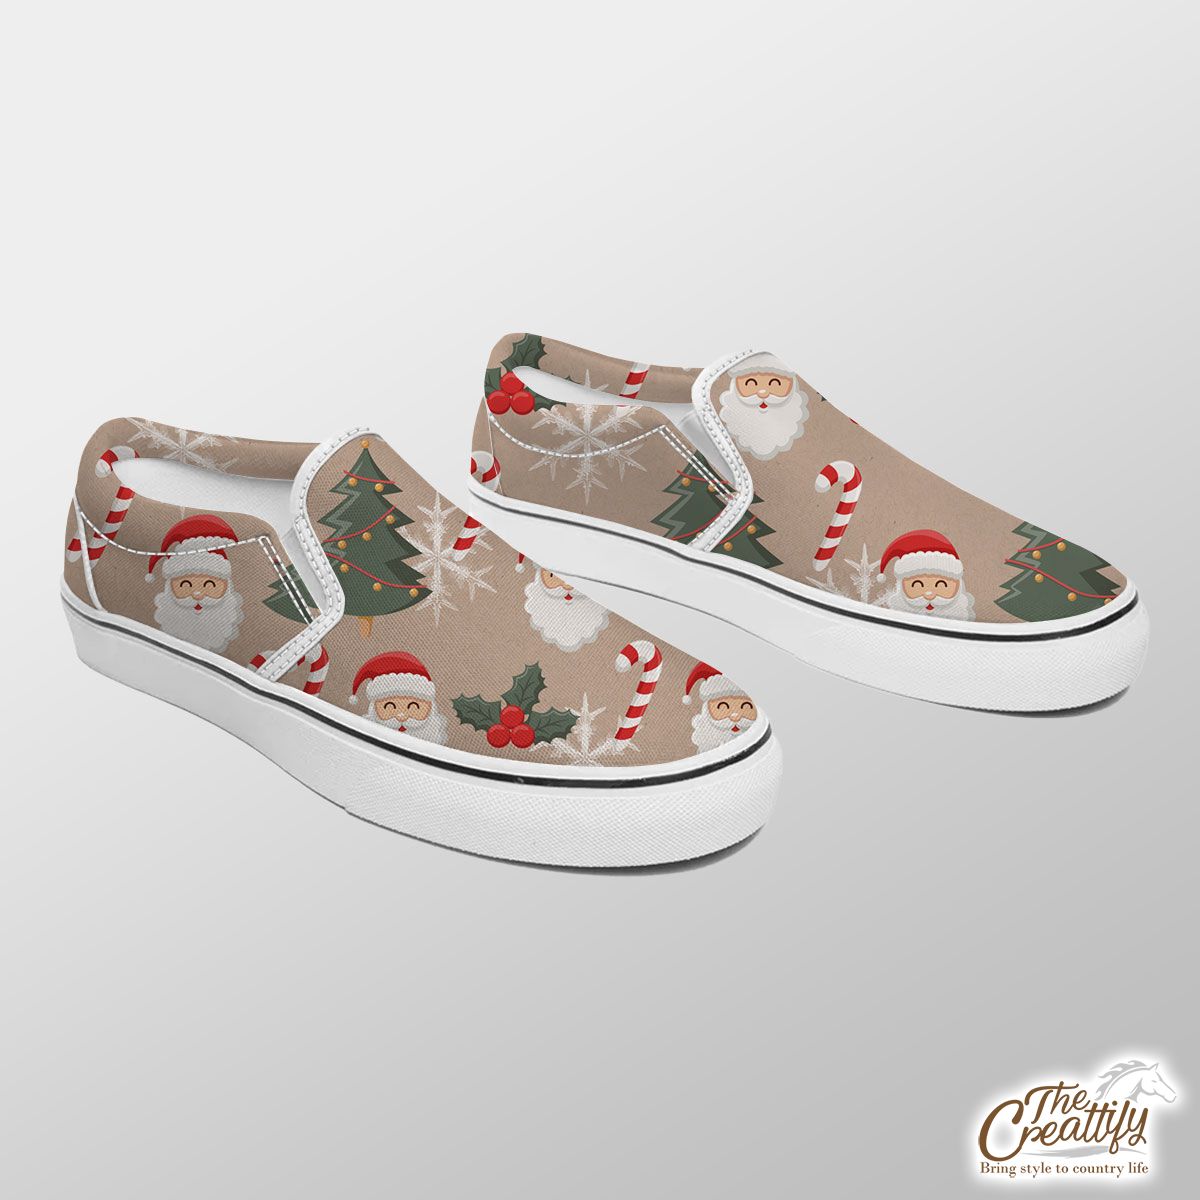 Santa Clause, Christmas Tree, Candy Cane, Holly Leaf On Snowflake Background Slip On Sneakers